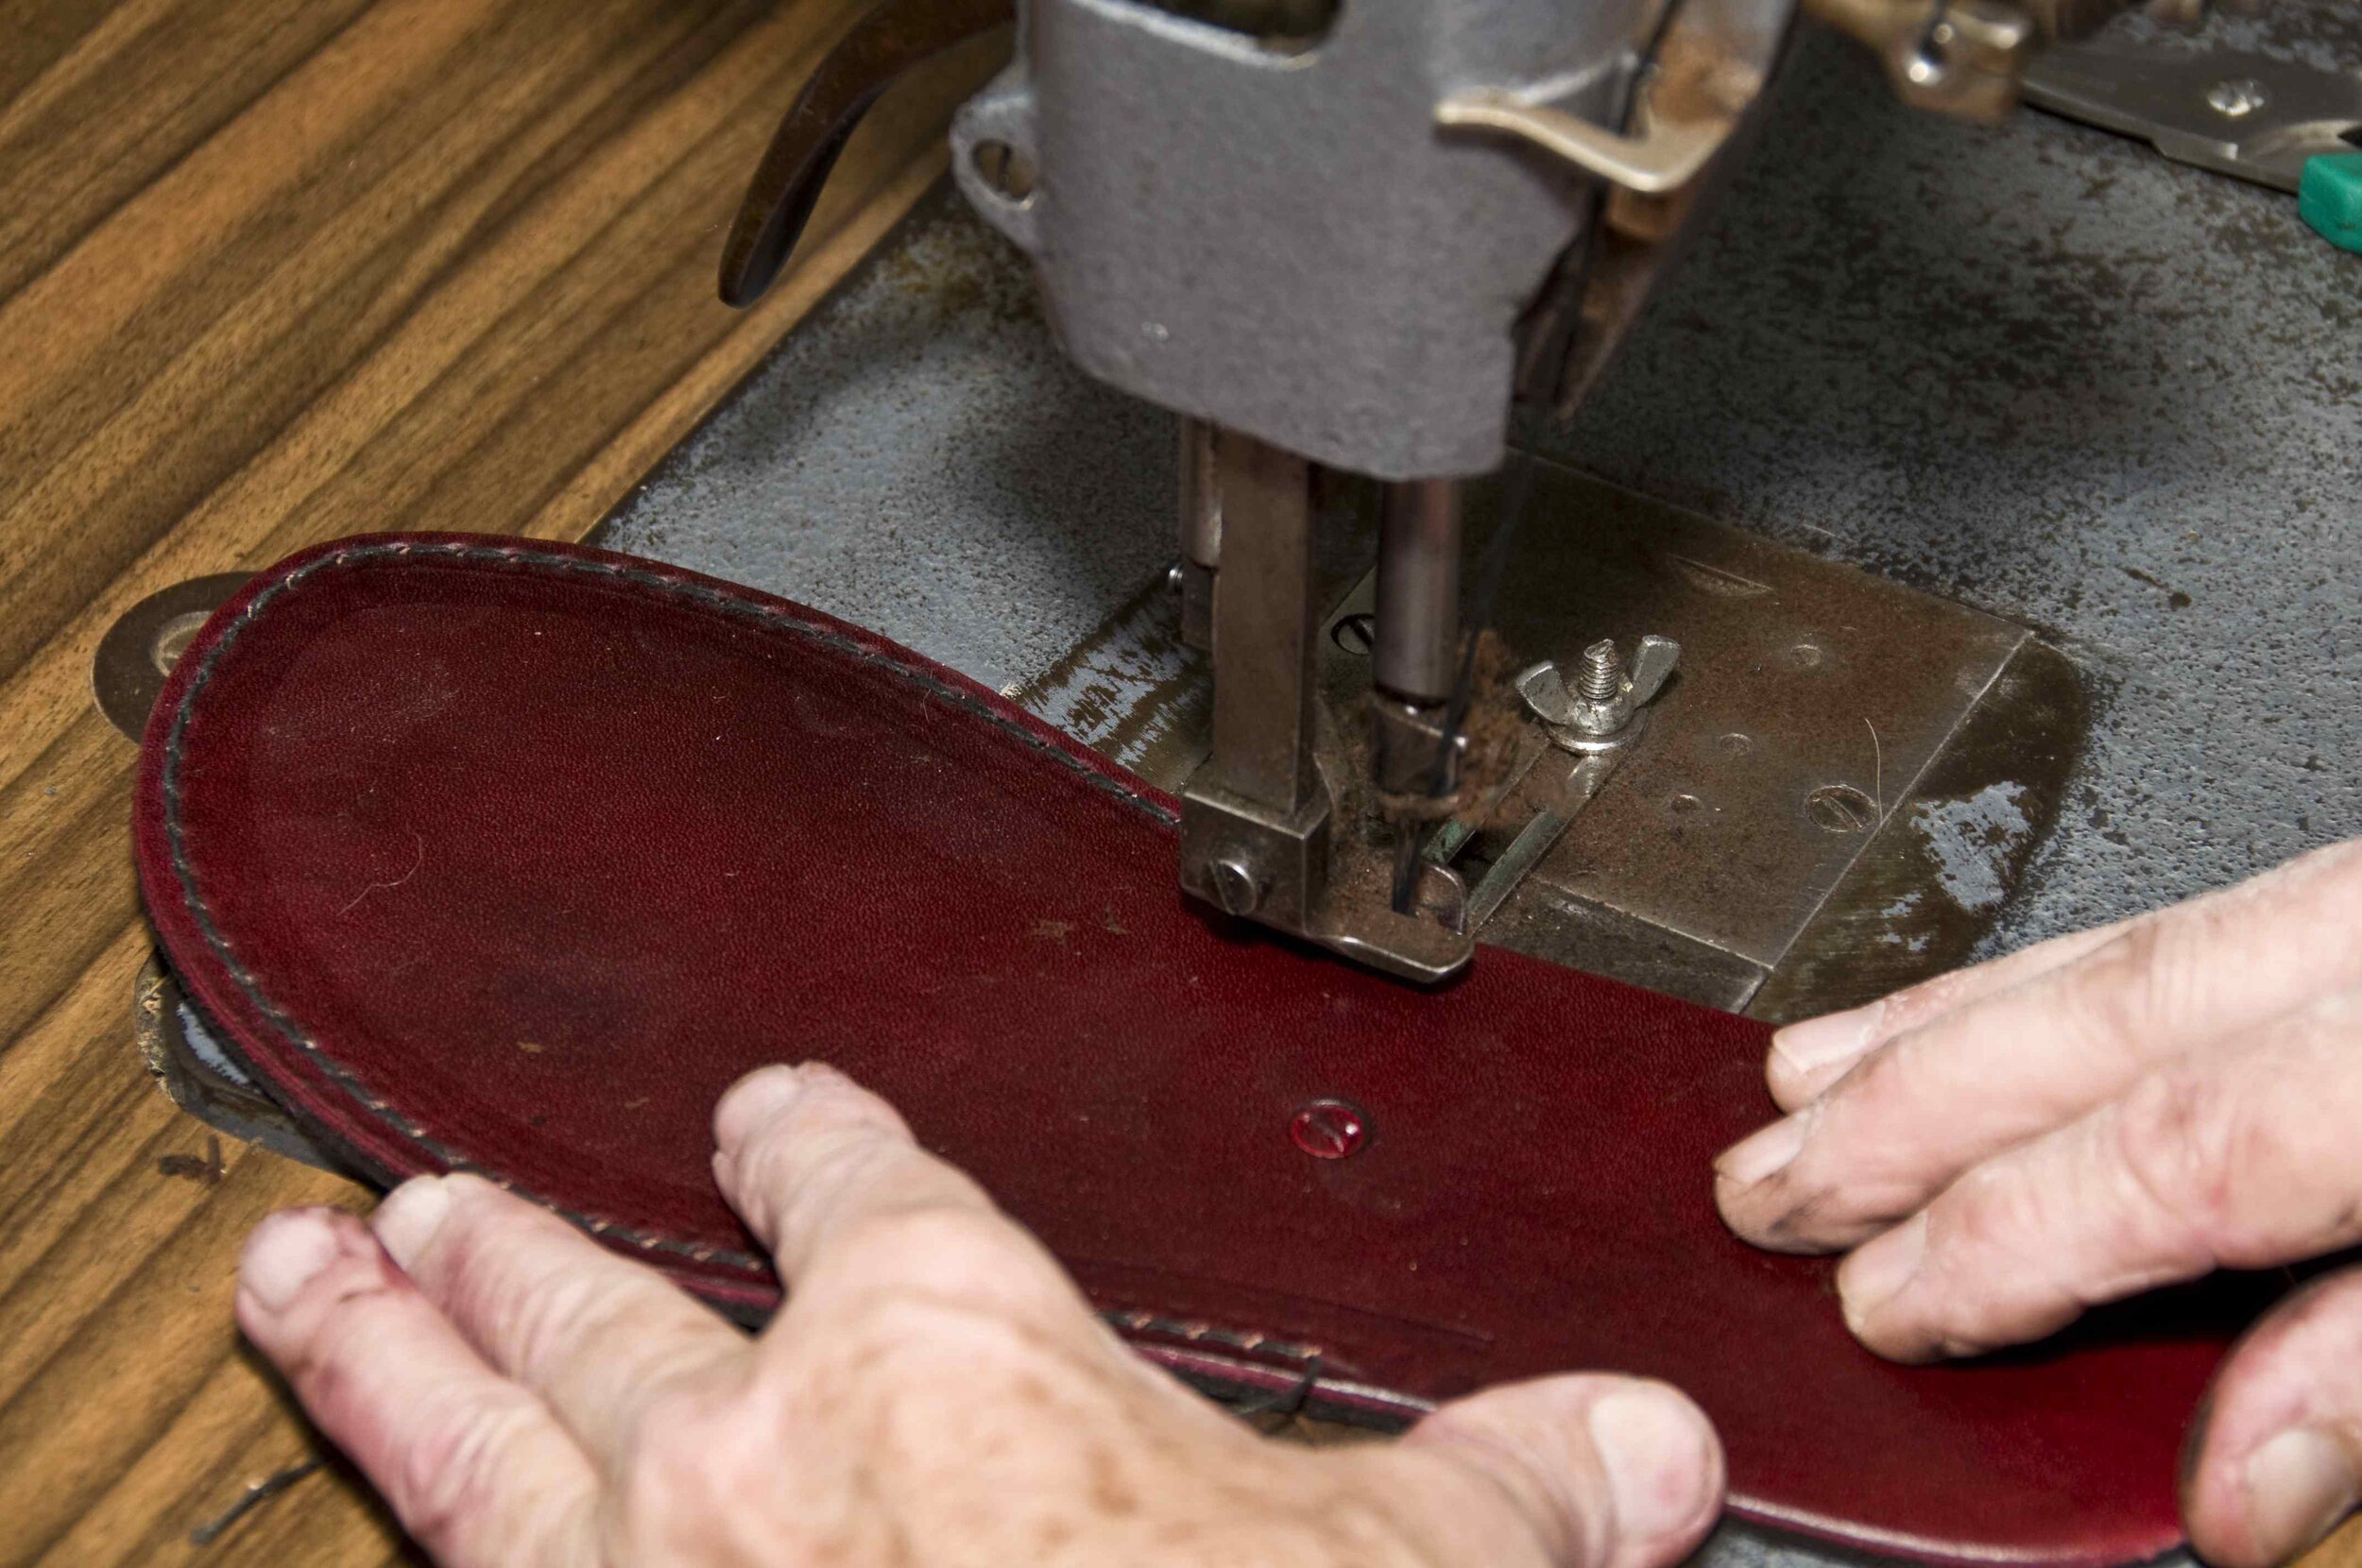 Stitching the sole